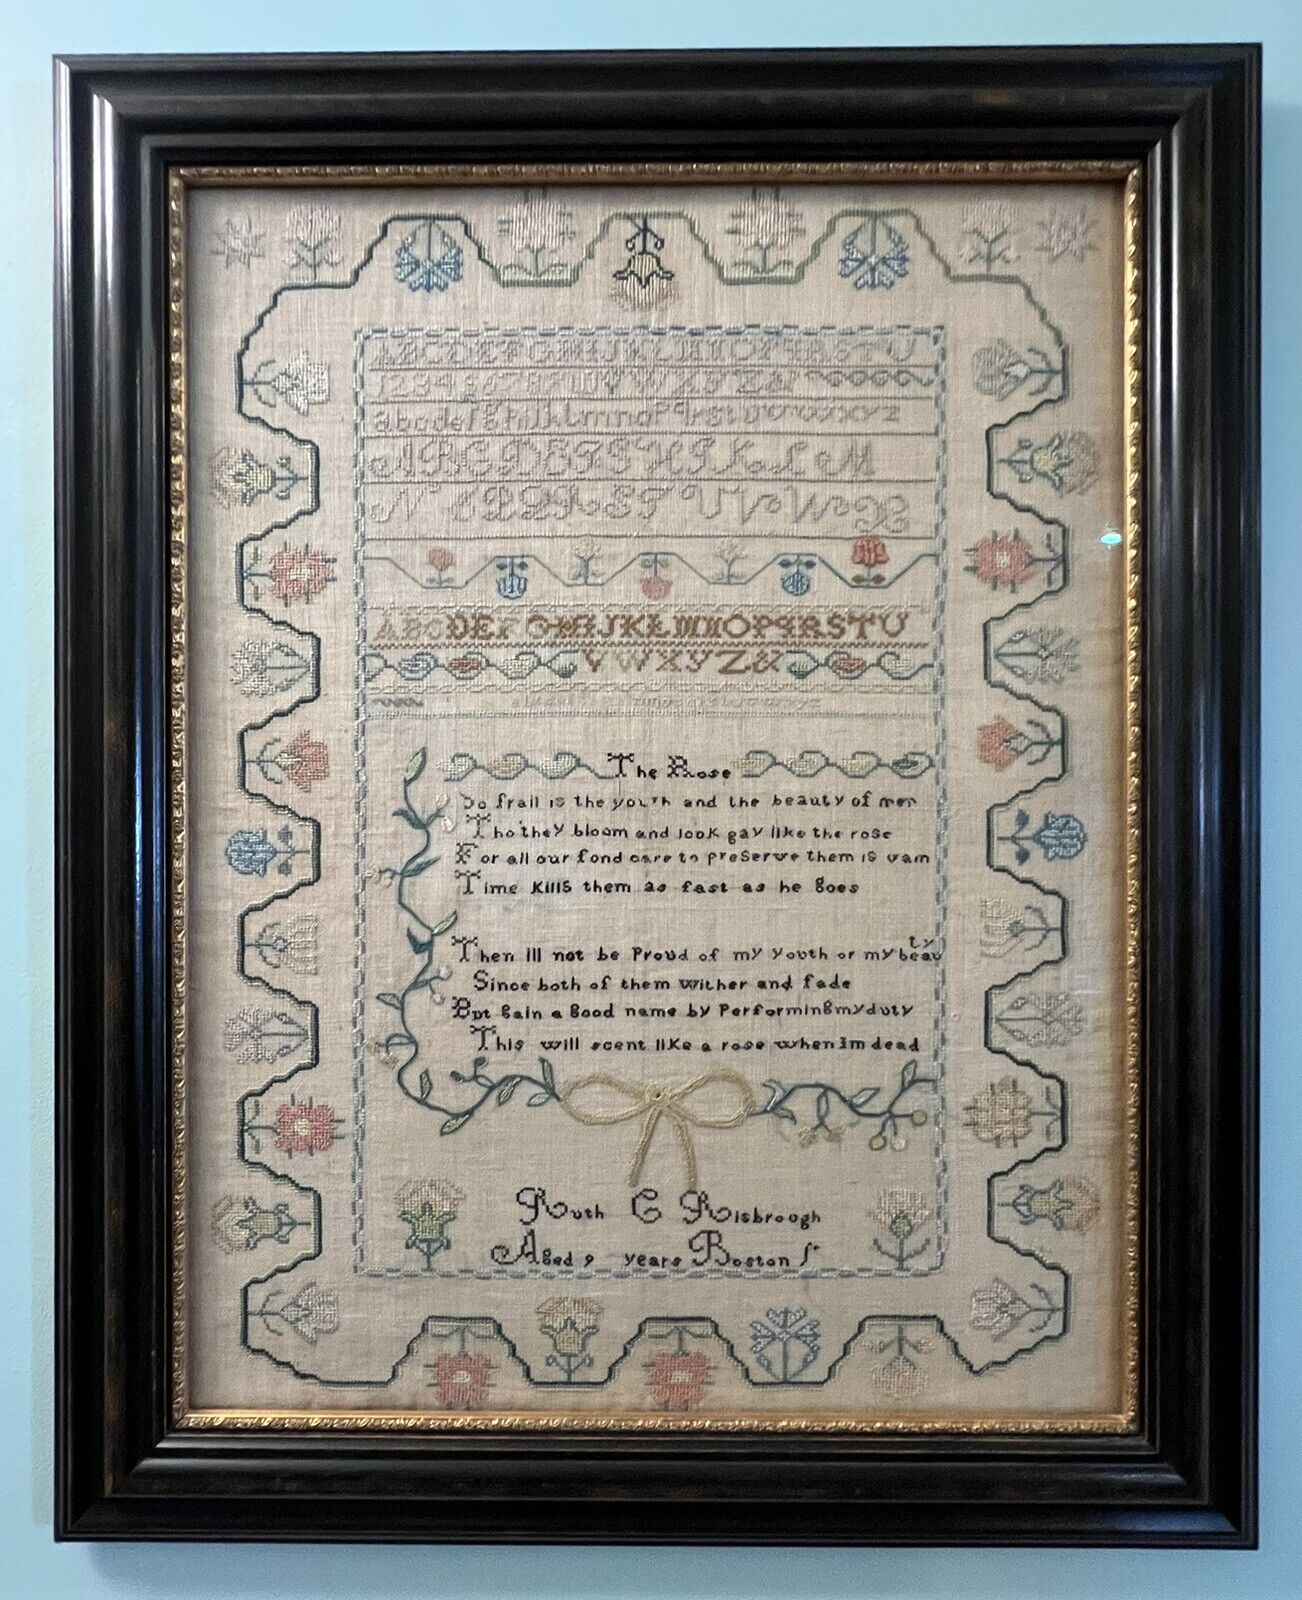 Large Exceptional American Early 19th c Sampler by Ruth C. Risbrough of Boston